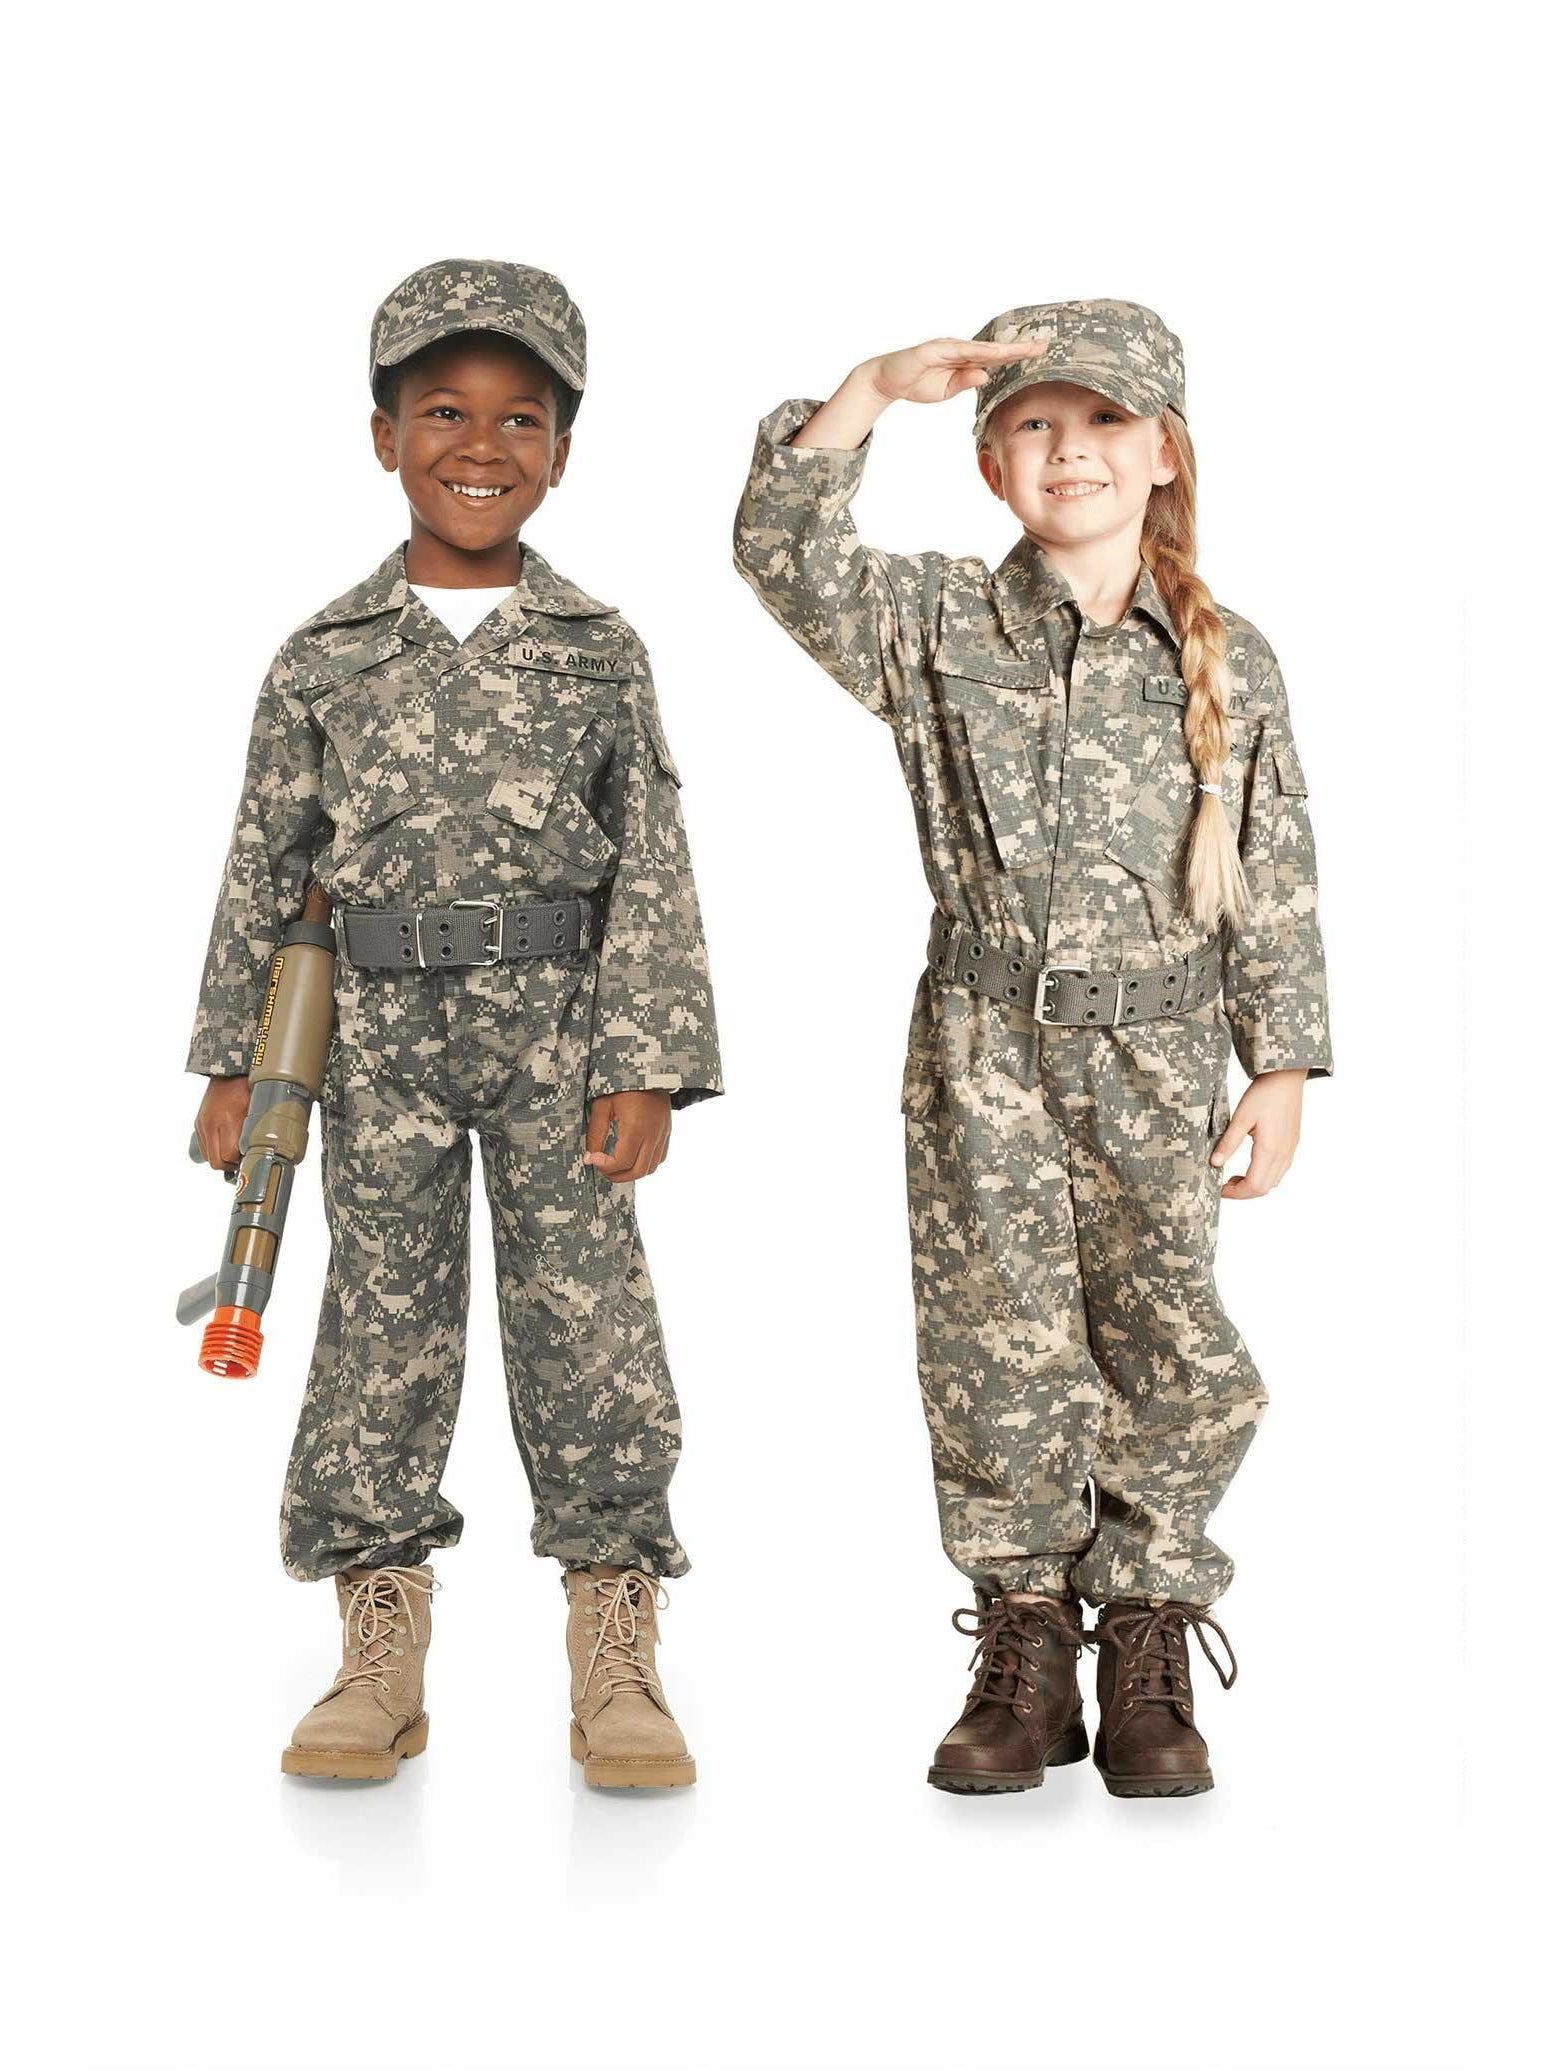 Camouflage Desert Army Soldier Costume for Kids – Chasing Fireflies